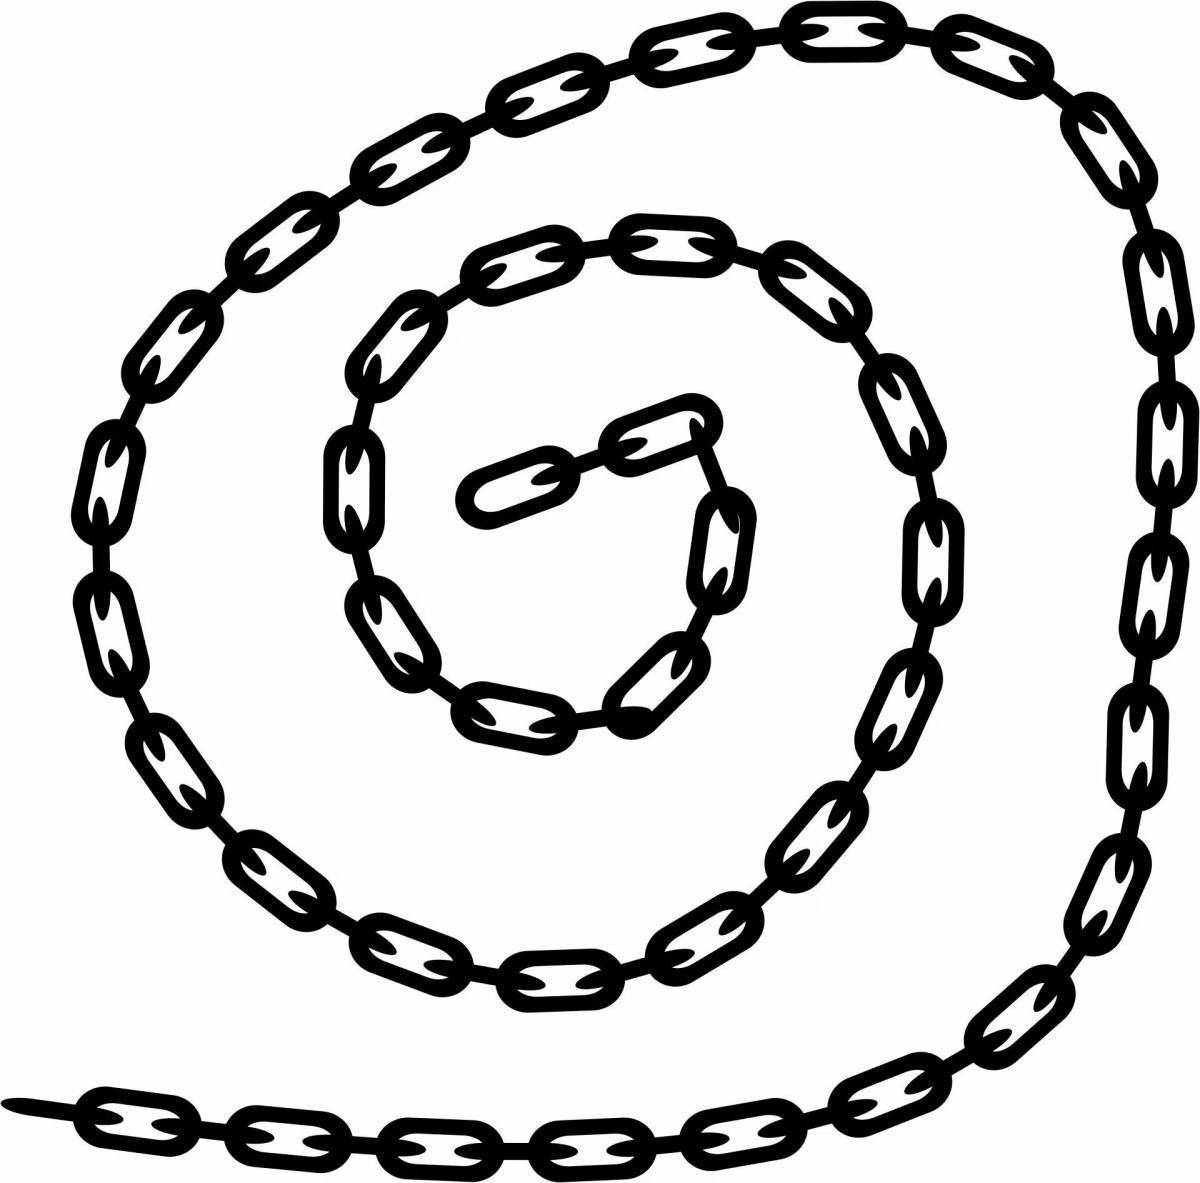 Coloring page charming chain